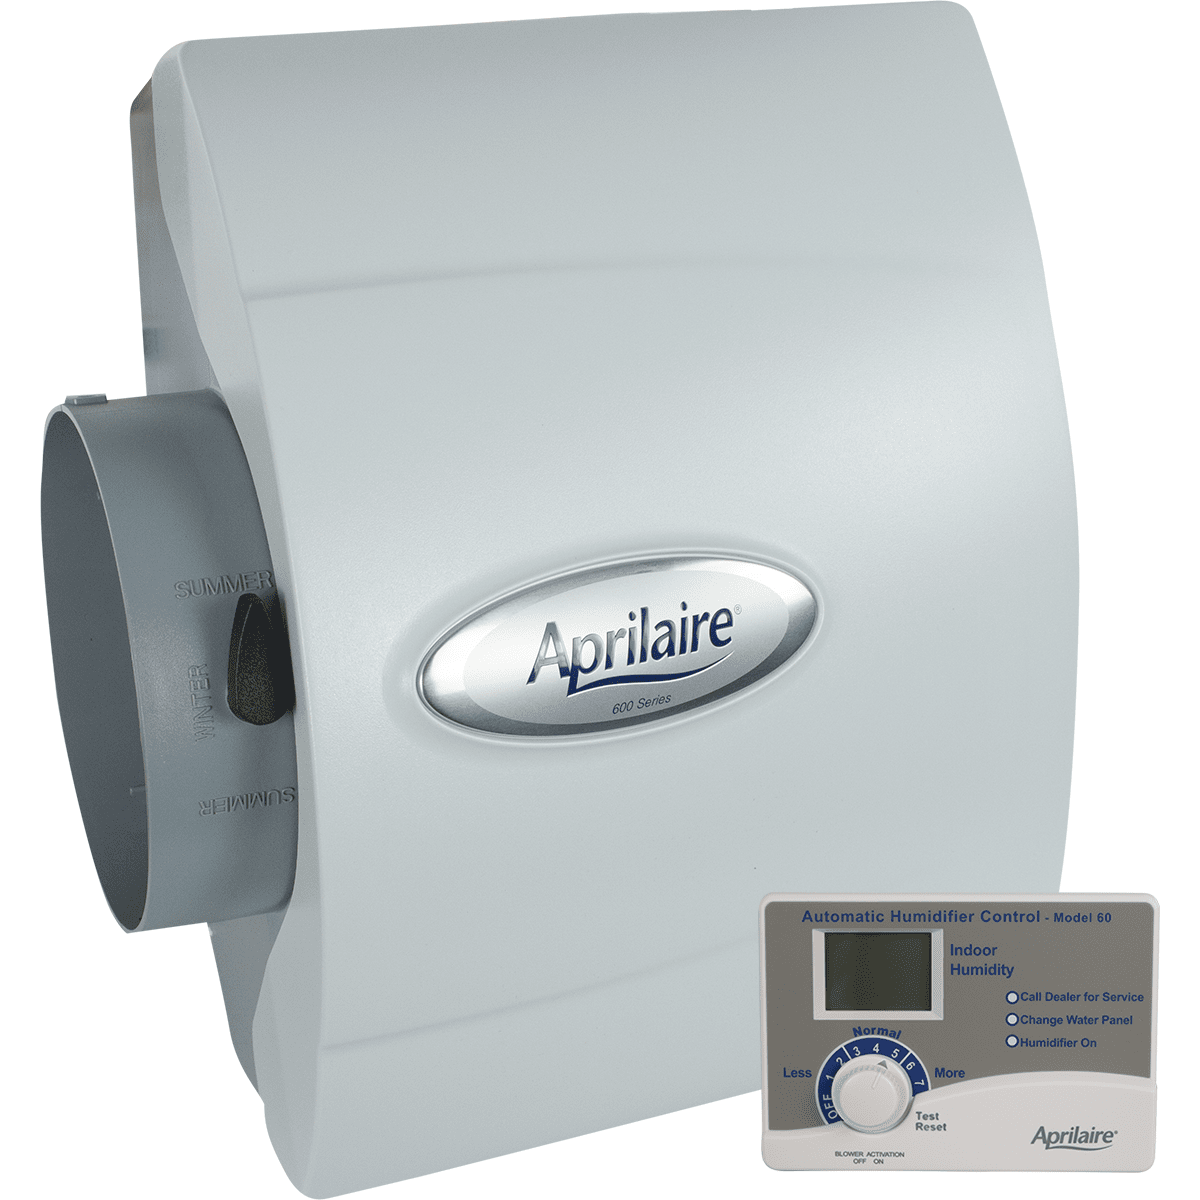 Aprilaire 600 Large Bypass Humidifier - Auto Digital Control